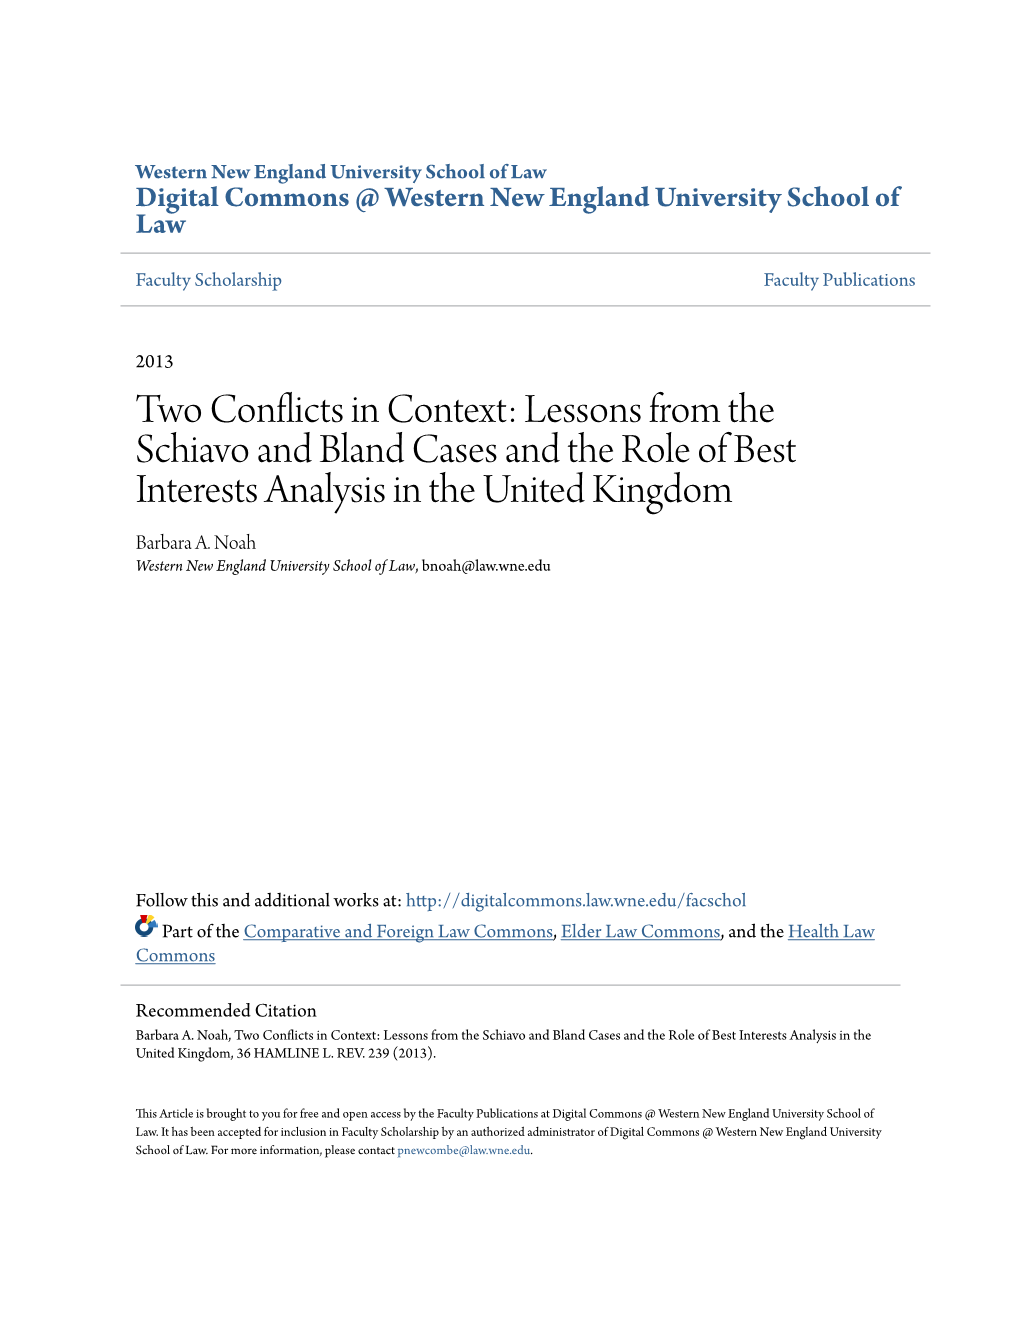 Lessons from the Schiavo and Bland Cases and the Role of Best Interests Analysis in the United Kingdom Barbara A